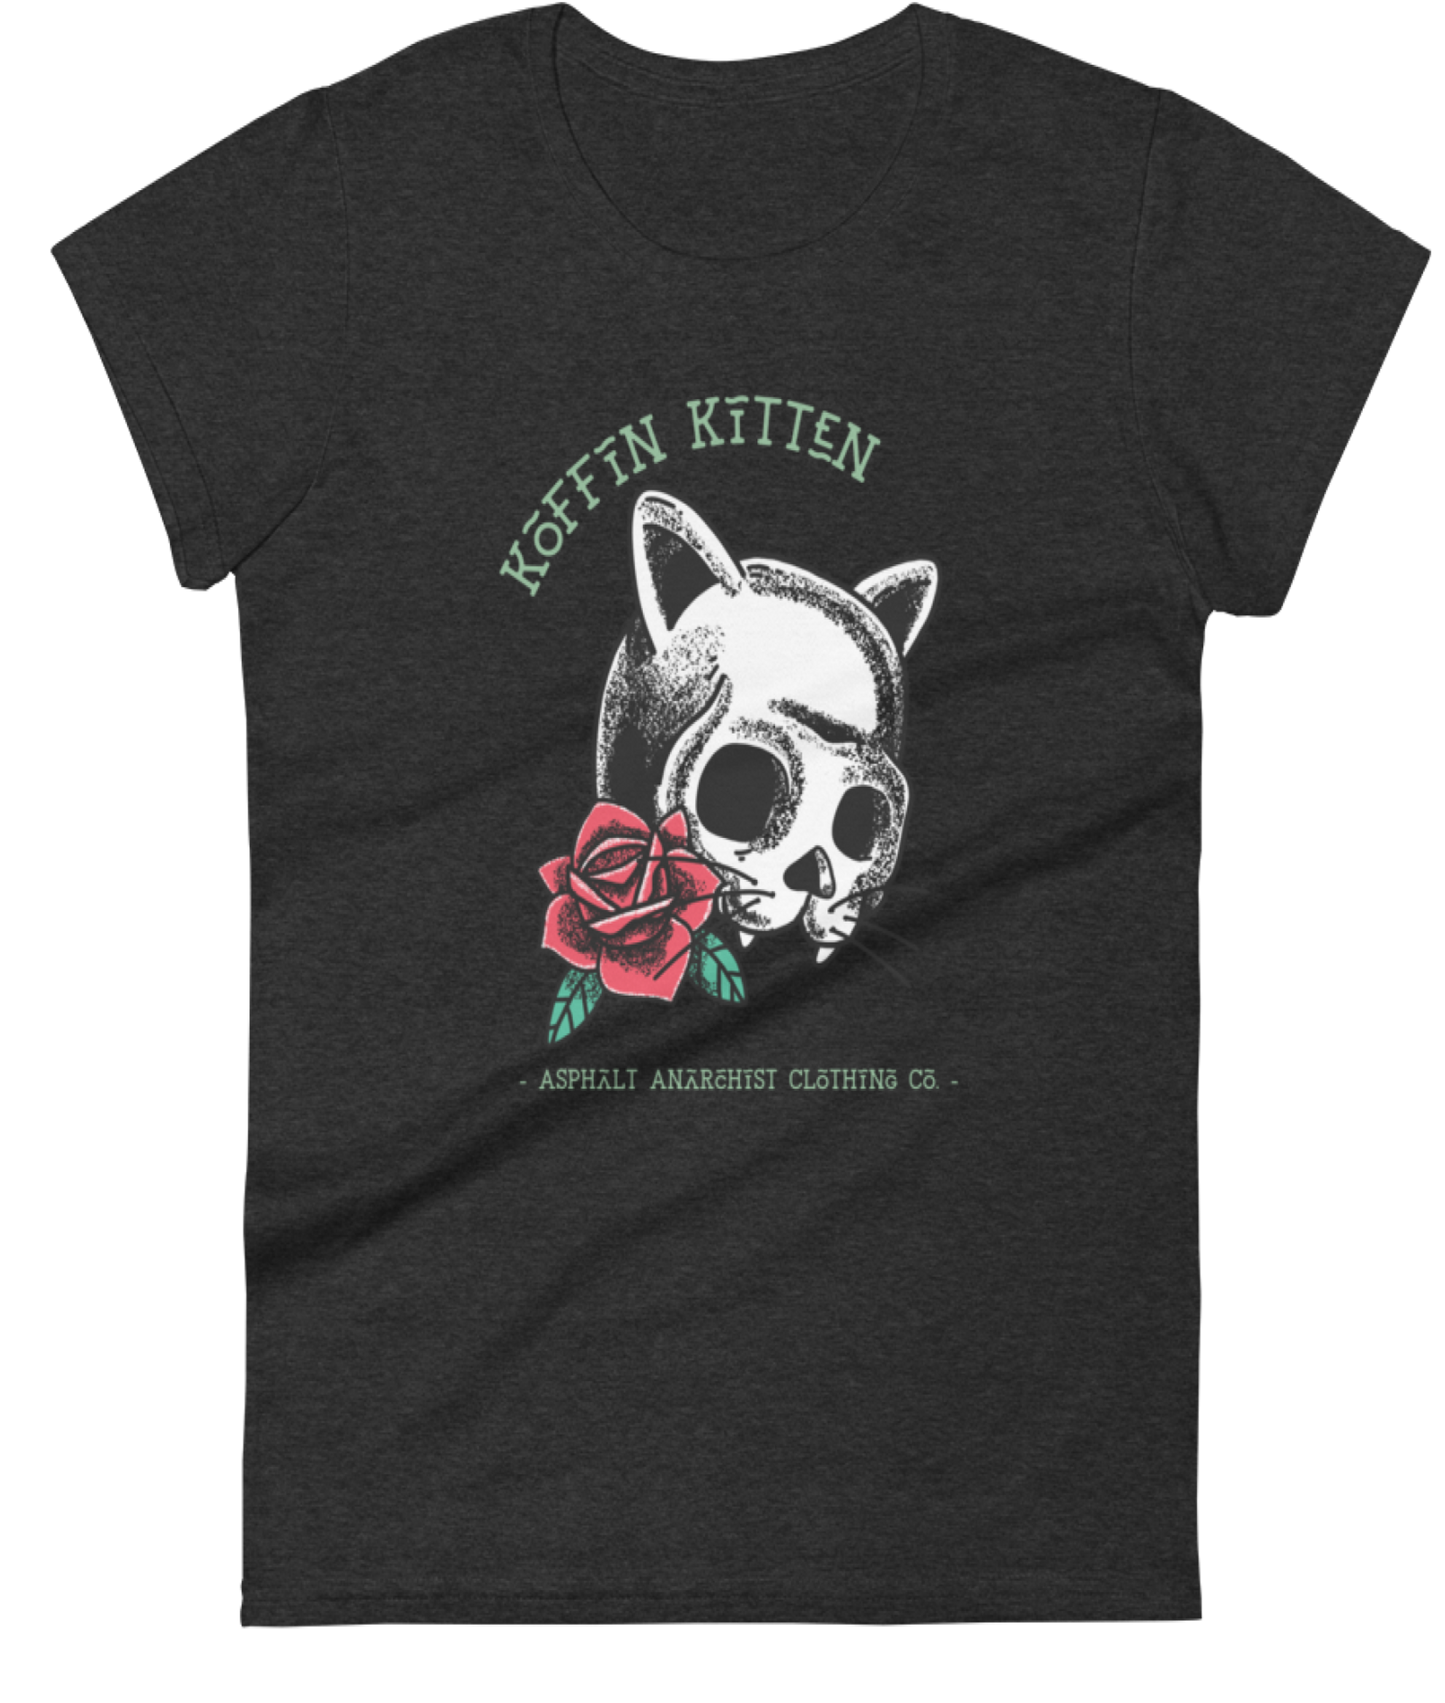 Koffin Kitten Women's Tee Rockabilly Pin Up from Asphalt Anarchist Clothing Co. HOT ROD KUSTOM KULTURE APPAREL & PRODUCTS